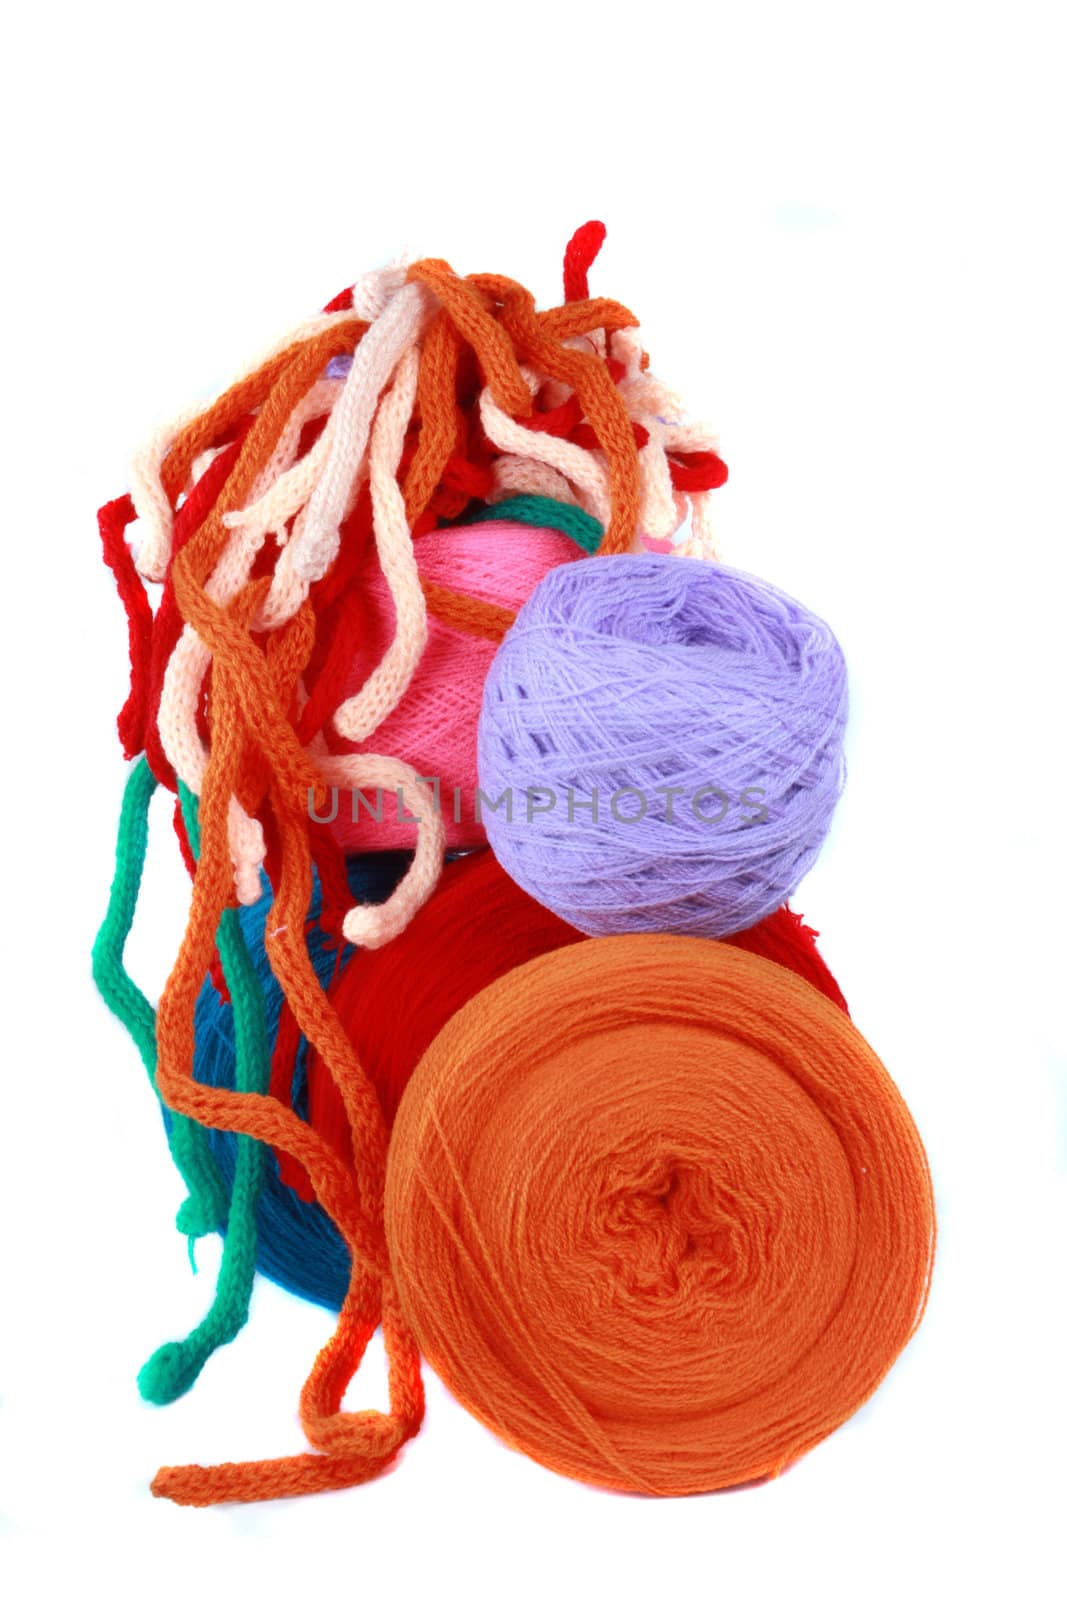 Balls and threads of colorful wool, on white studio background.